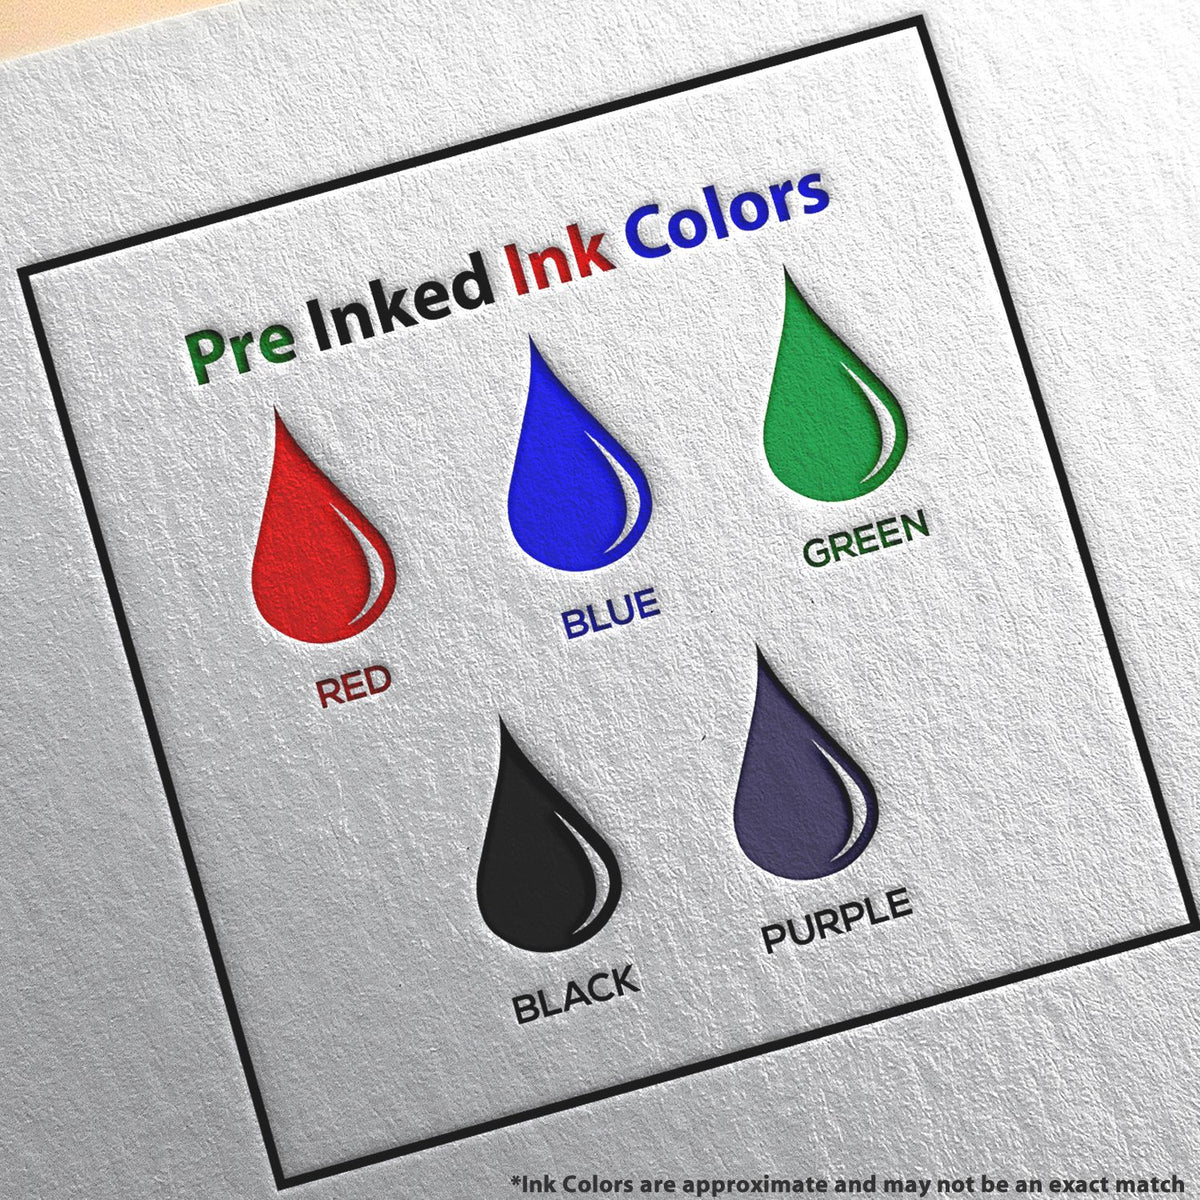 A picture showing the different ink colors or hues available for the Slim Pre-Inked West Virginia Architect Seal Stamp product.